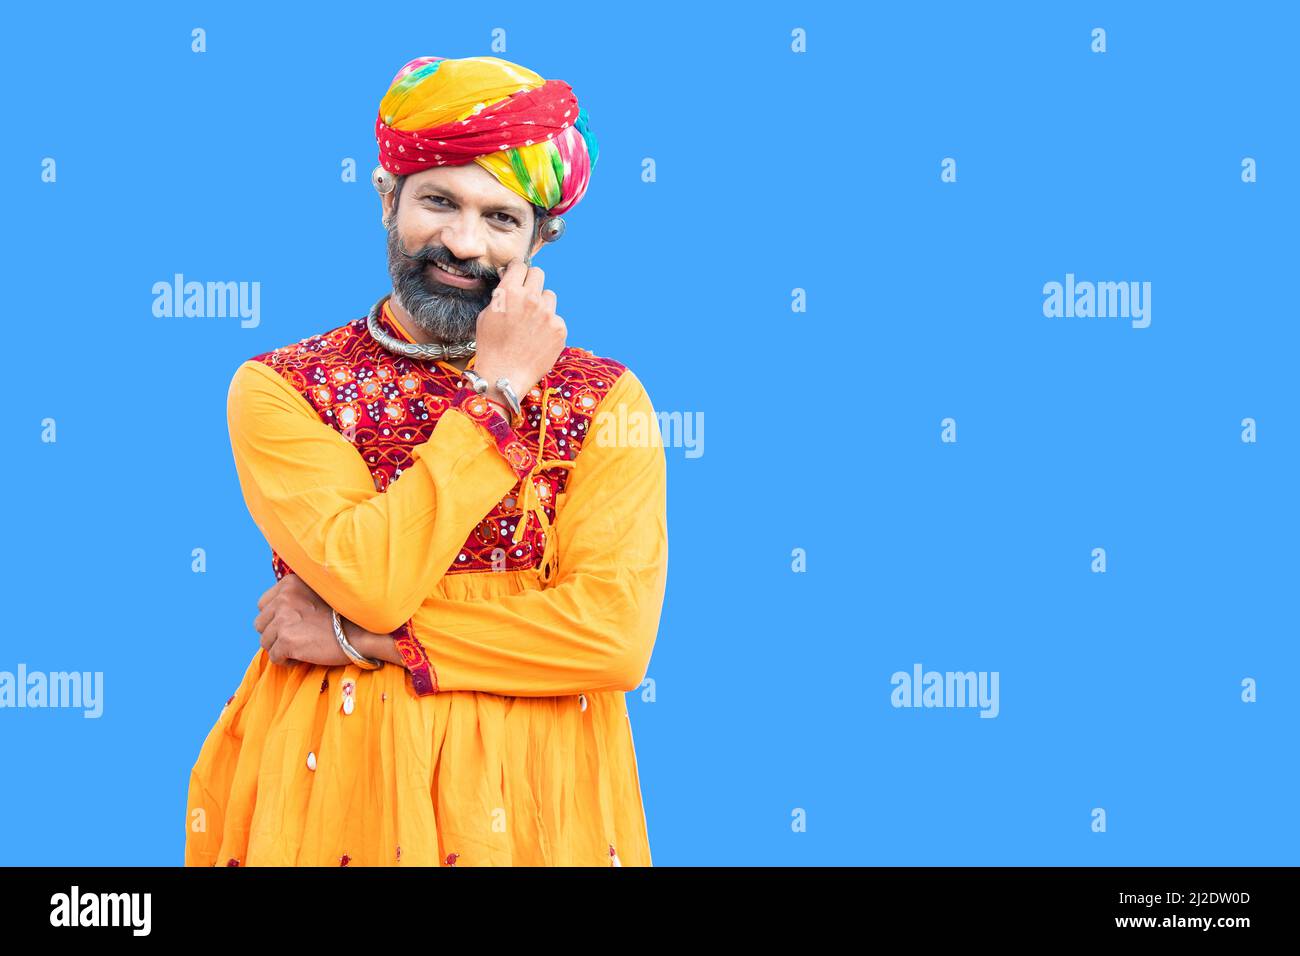 Portrait of happy beard indian rajasthan man wearing traditional colorful outfit and turban touch mustache pose against blue background. advertisement Stock Photo